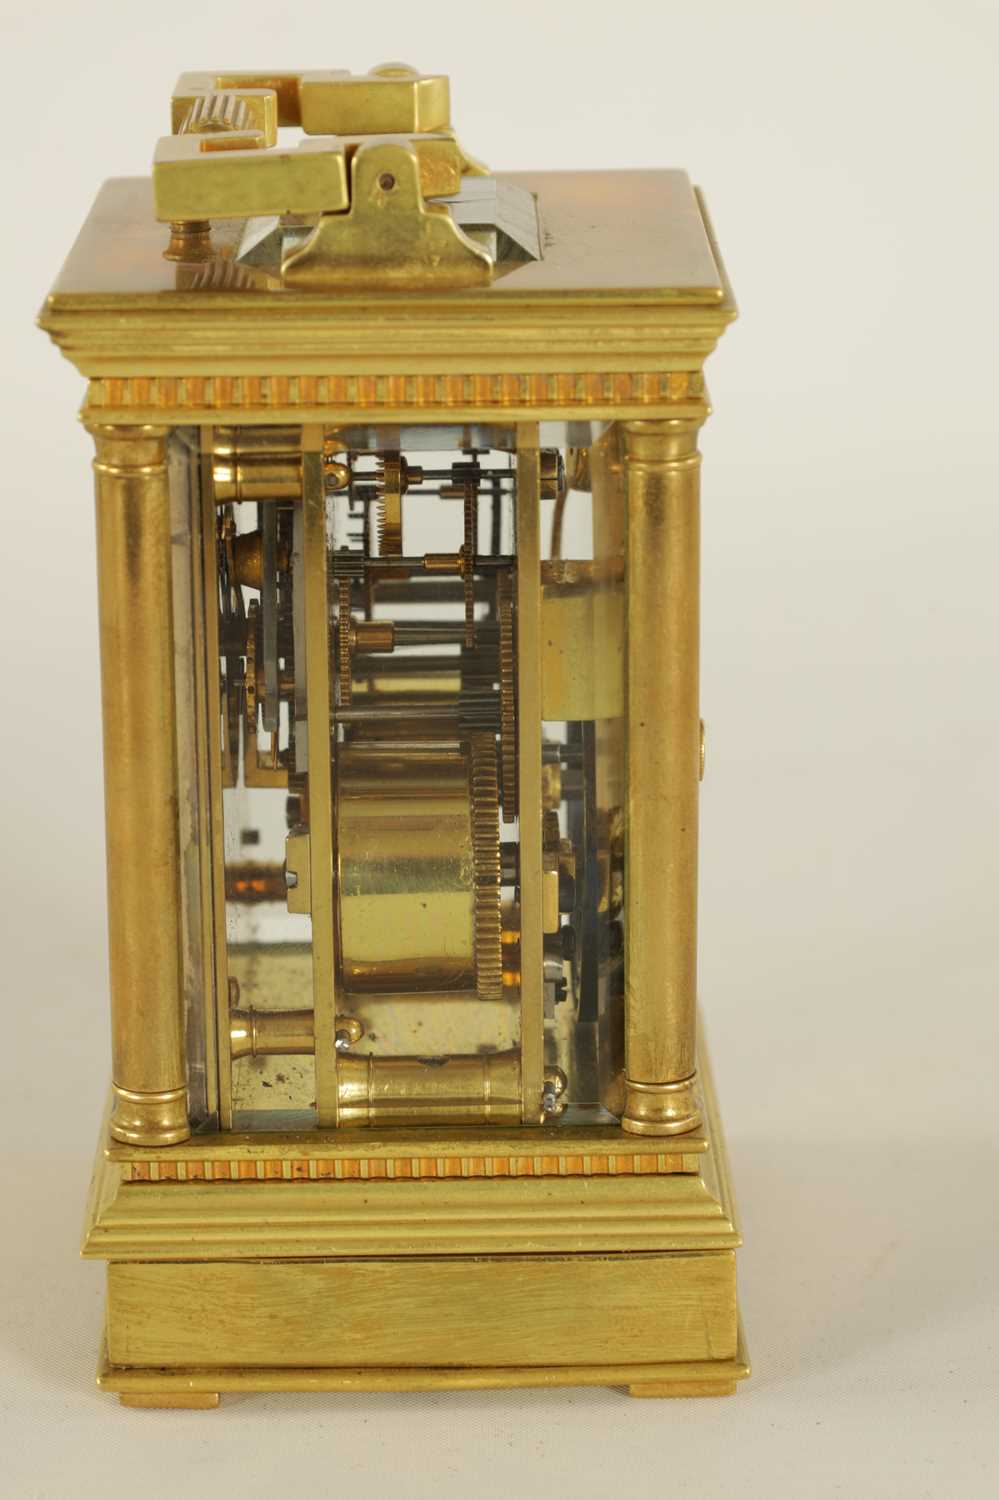 GAY AND LAMAILLE. A LATE 19TH CENTURY SMALL FRENCH REPEATING CARRIAGE CLOCK - Image 6 of 7